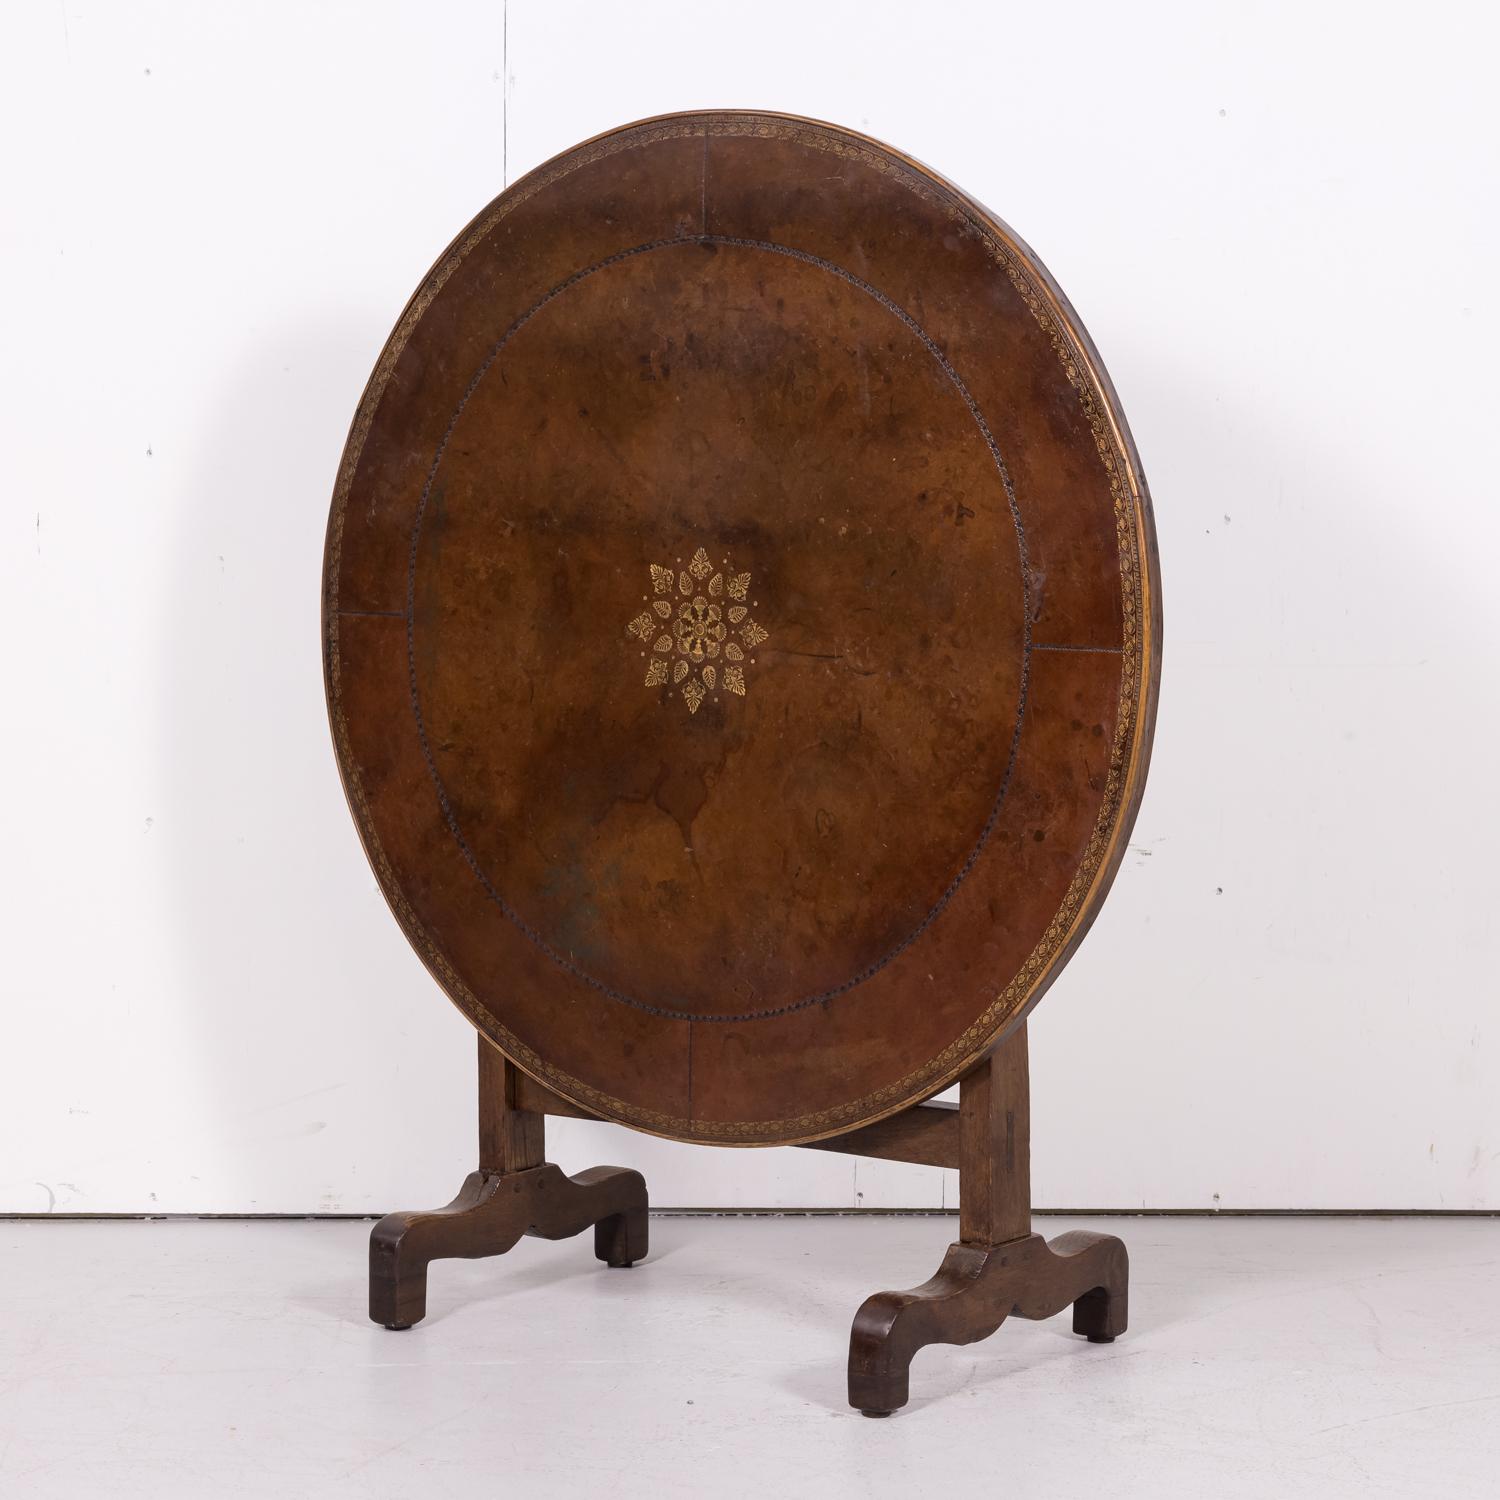 Rare 19th century French Charles X period tilt-top vendange or wine tasting table handcrafted of old growth oak near Beaujolais, having the original circular brown and gilded tooled leather top with richly patinated oak border, circa 1820s. Raised